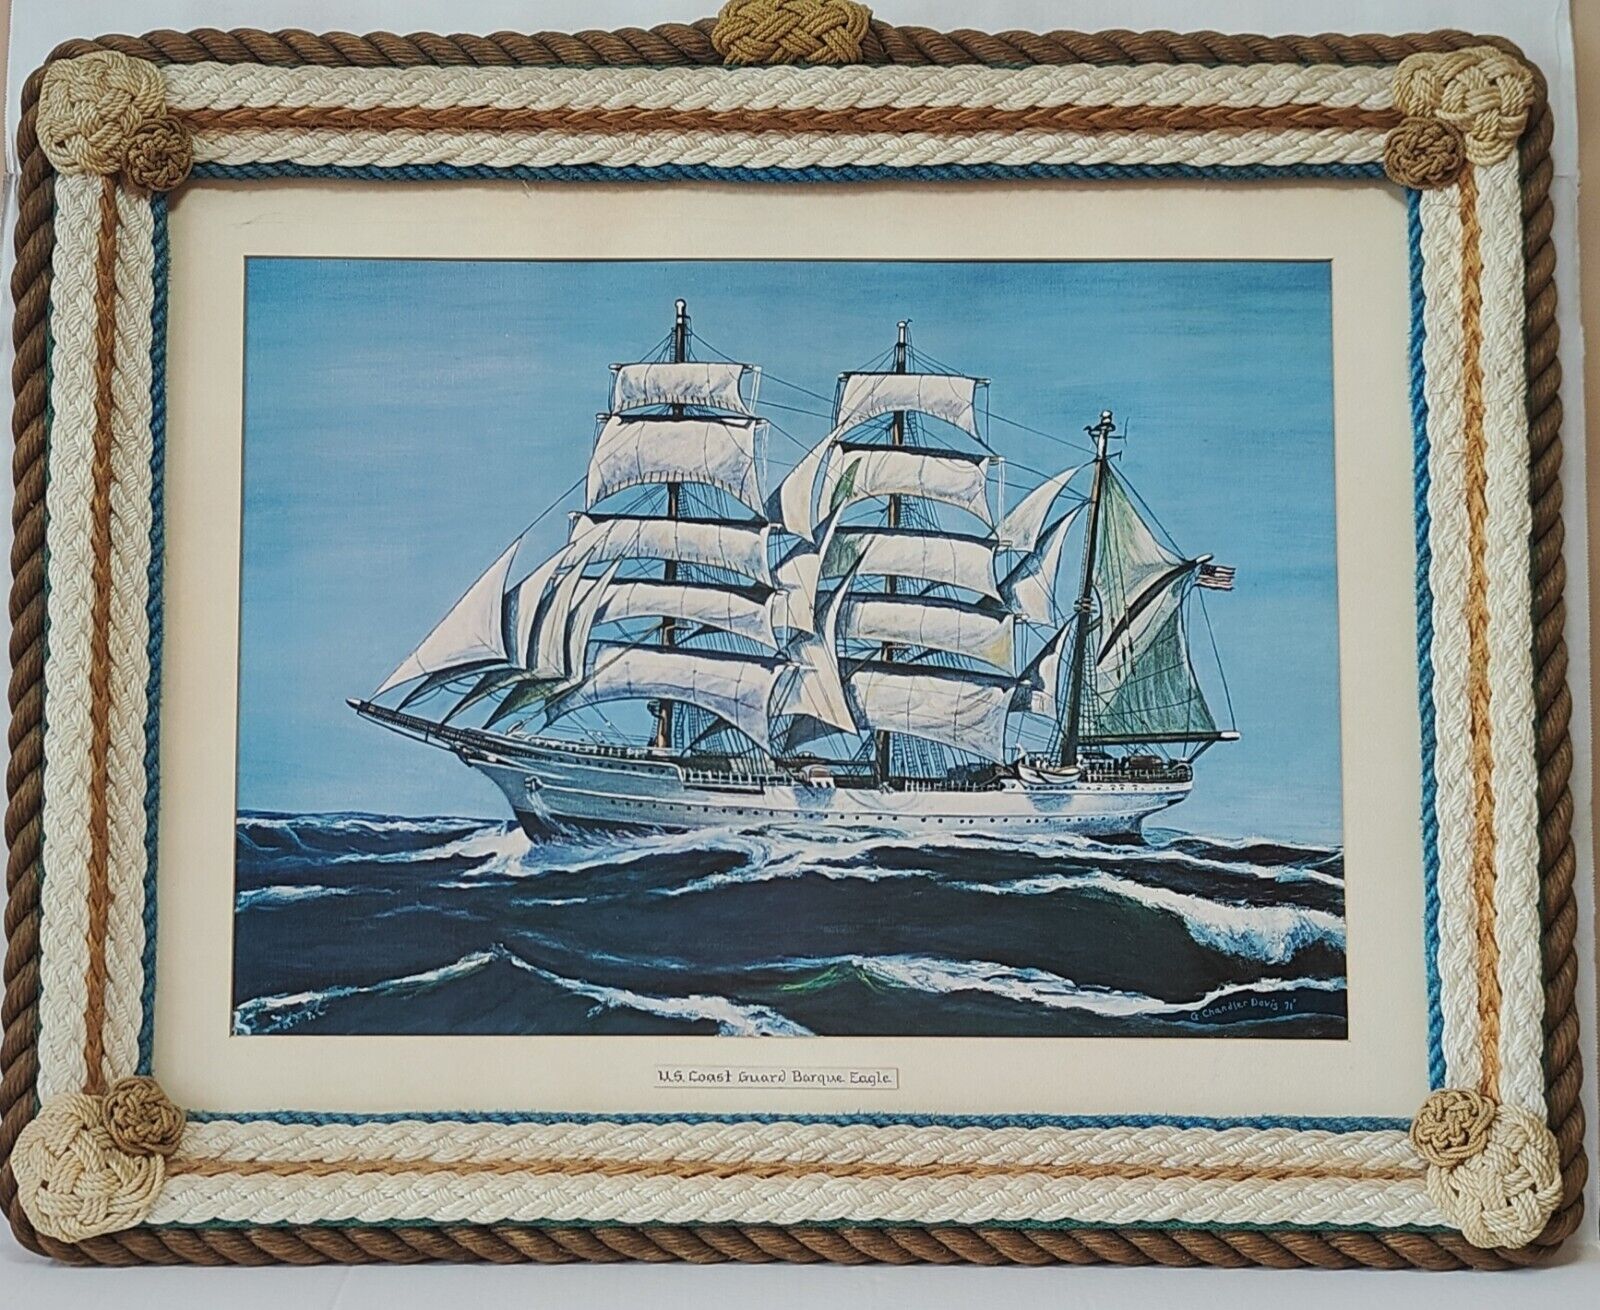 US Coast Guard Barque Eagle 1971 Painting Print In Real Ship Rope n Knot Frame